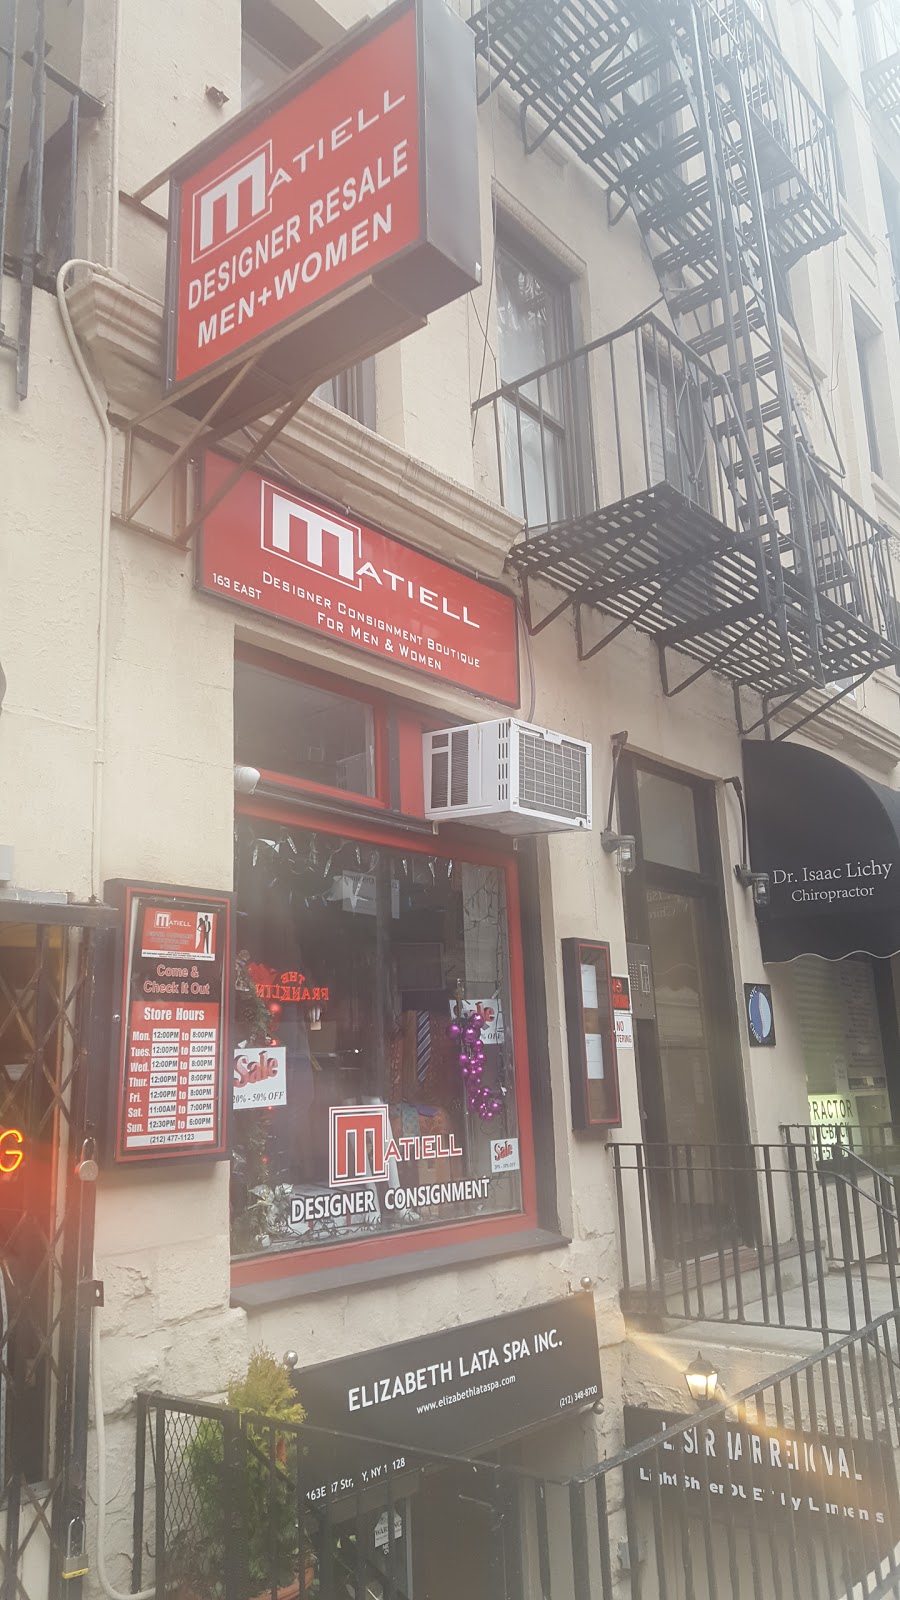 Matiell Consignment | 163 E 87th St, New York, NY 10128 | Phone: (212) 477-1123